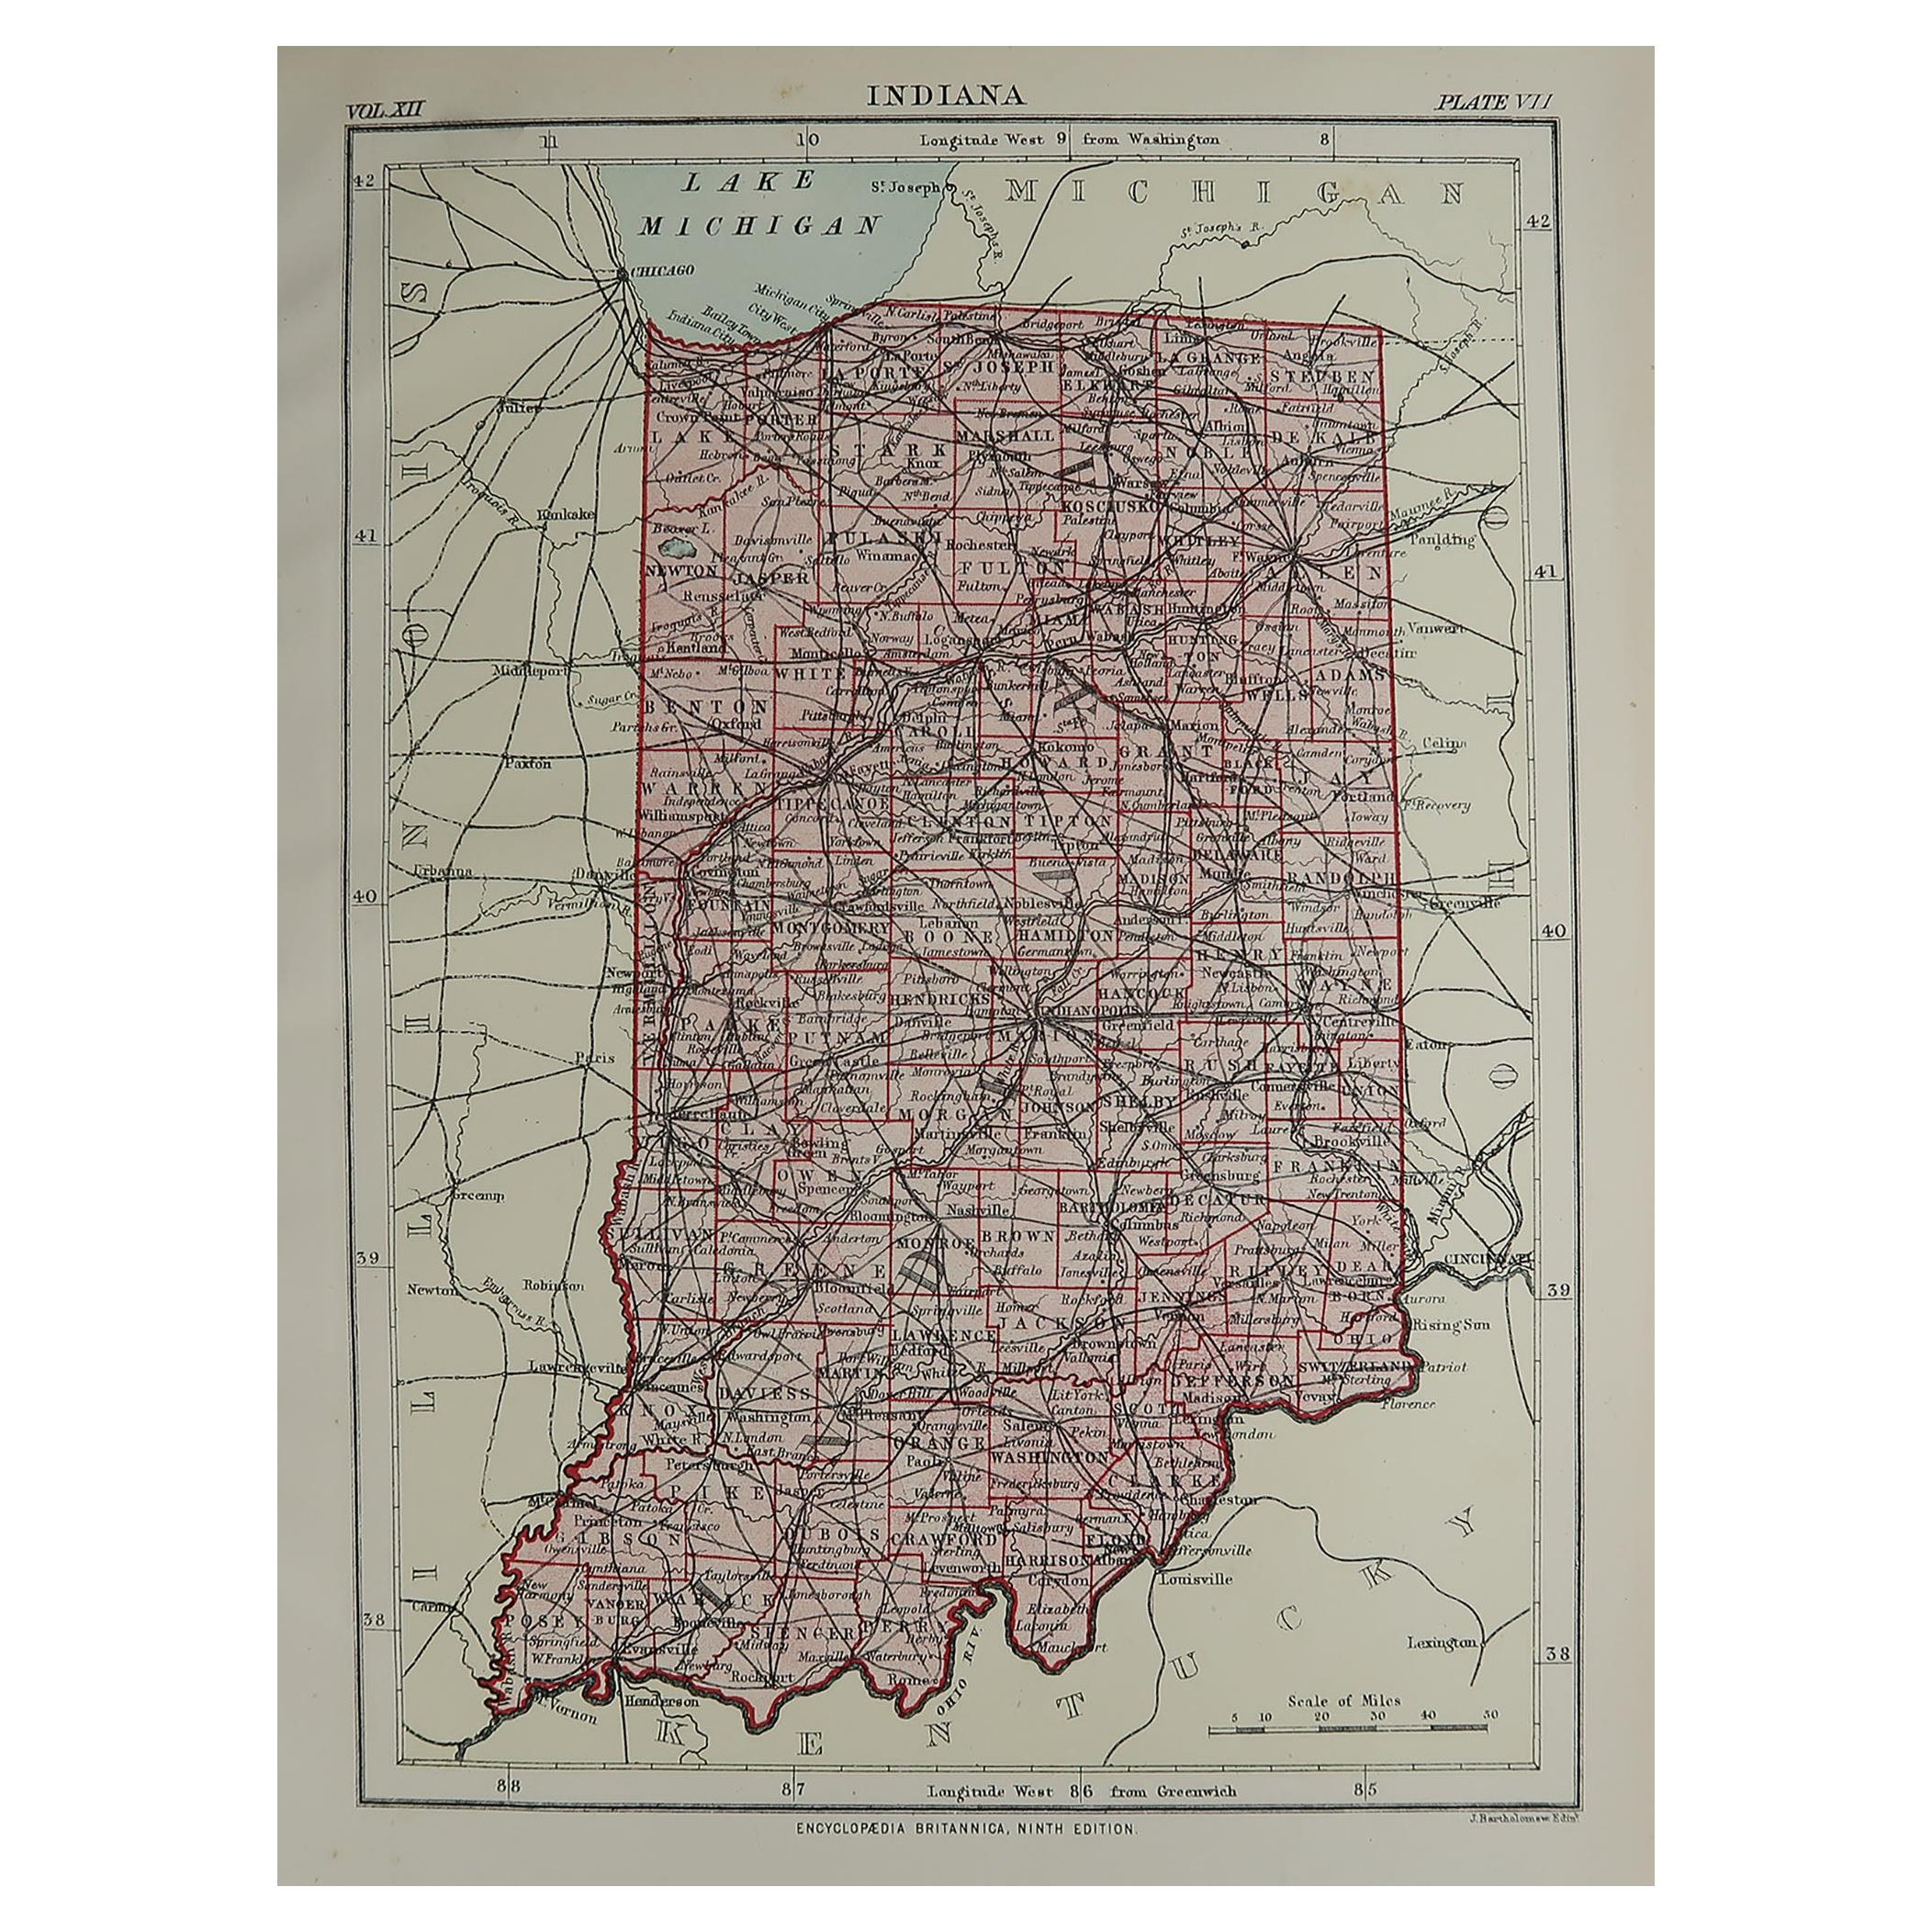 Original Antique Map of The American State of Indiana, 1889